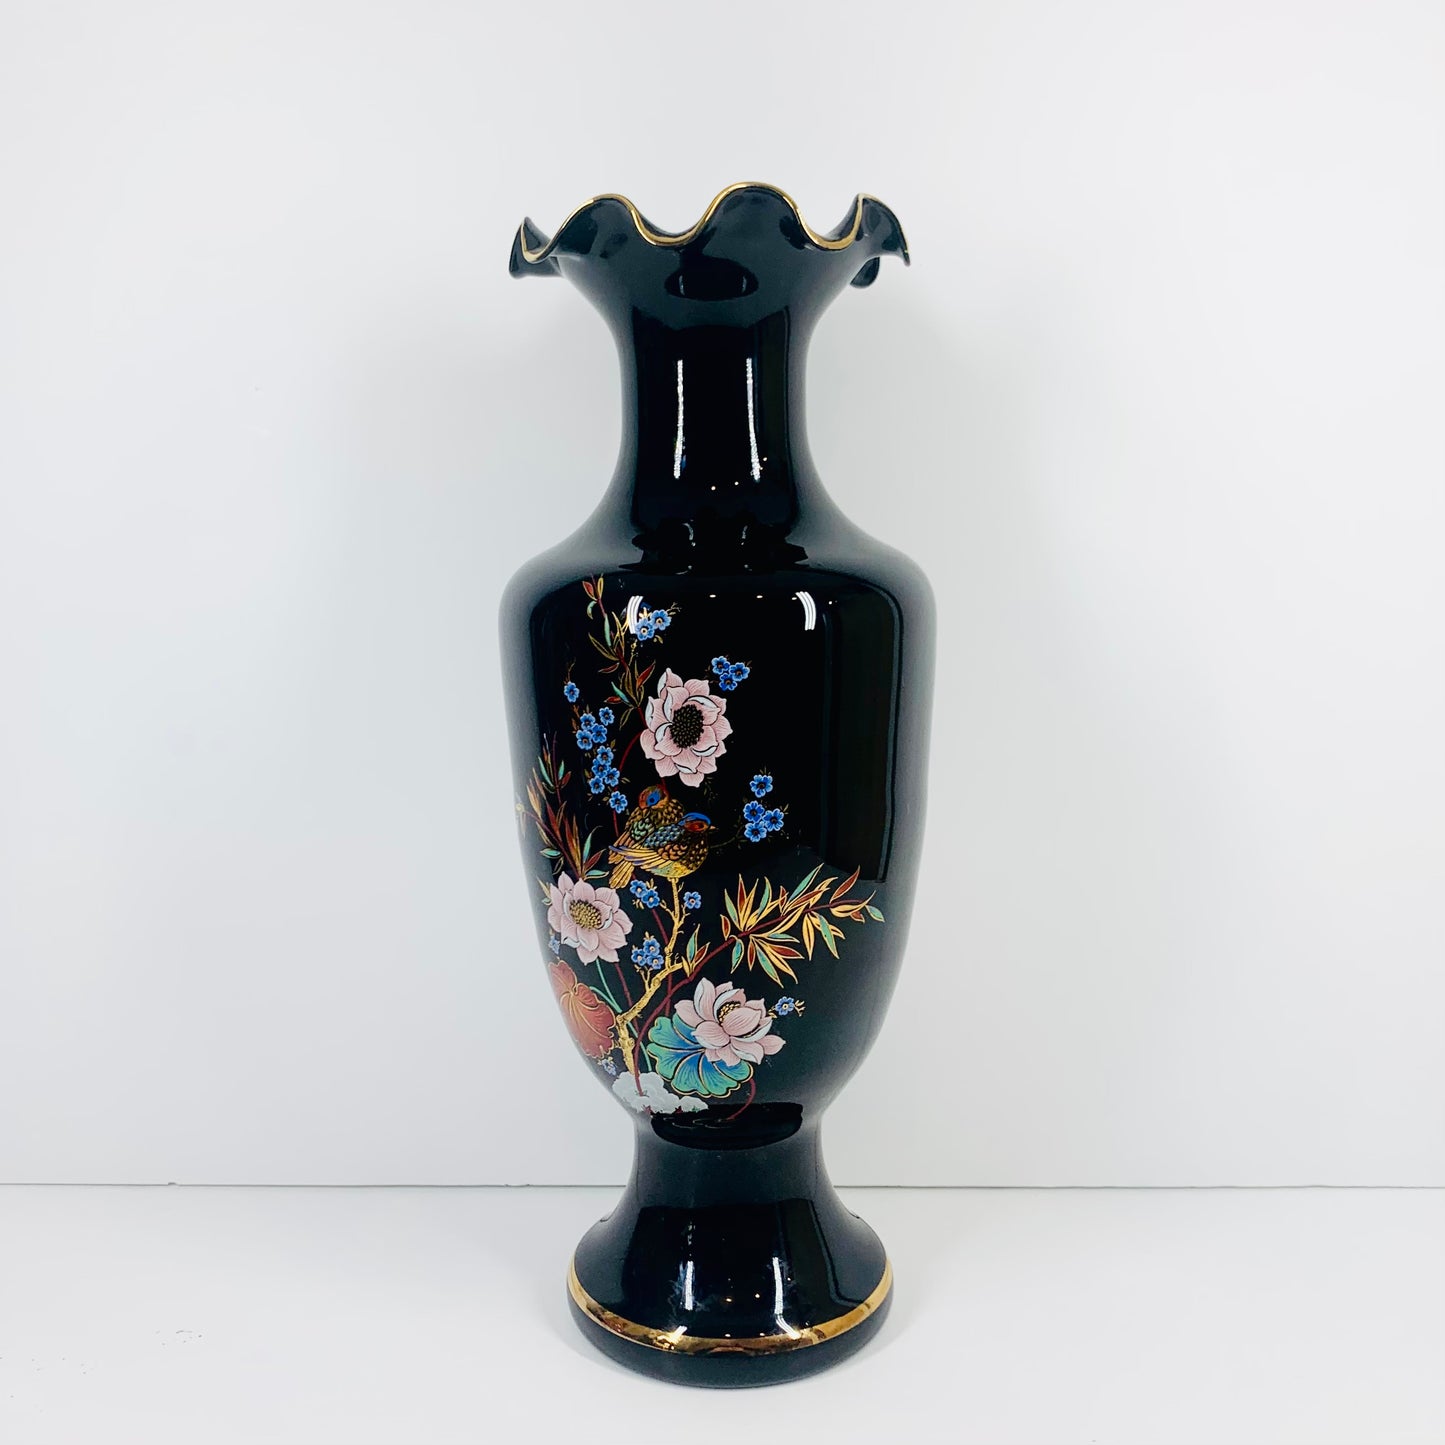 Vintage hand painted Murano black glass vase with ruffle rim